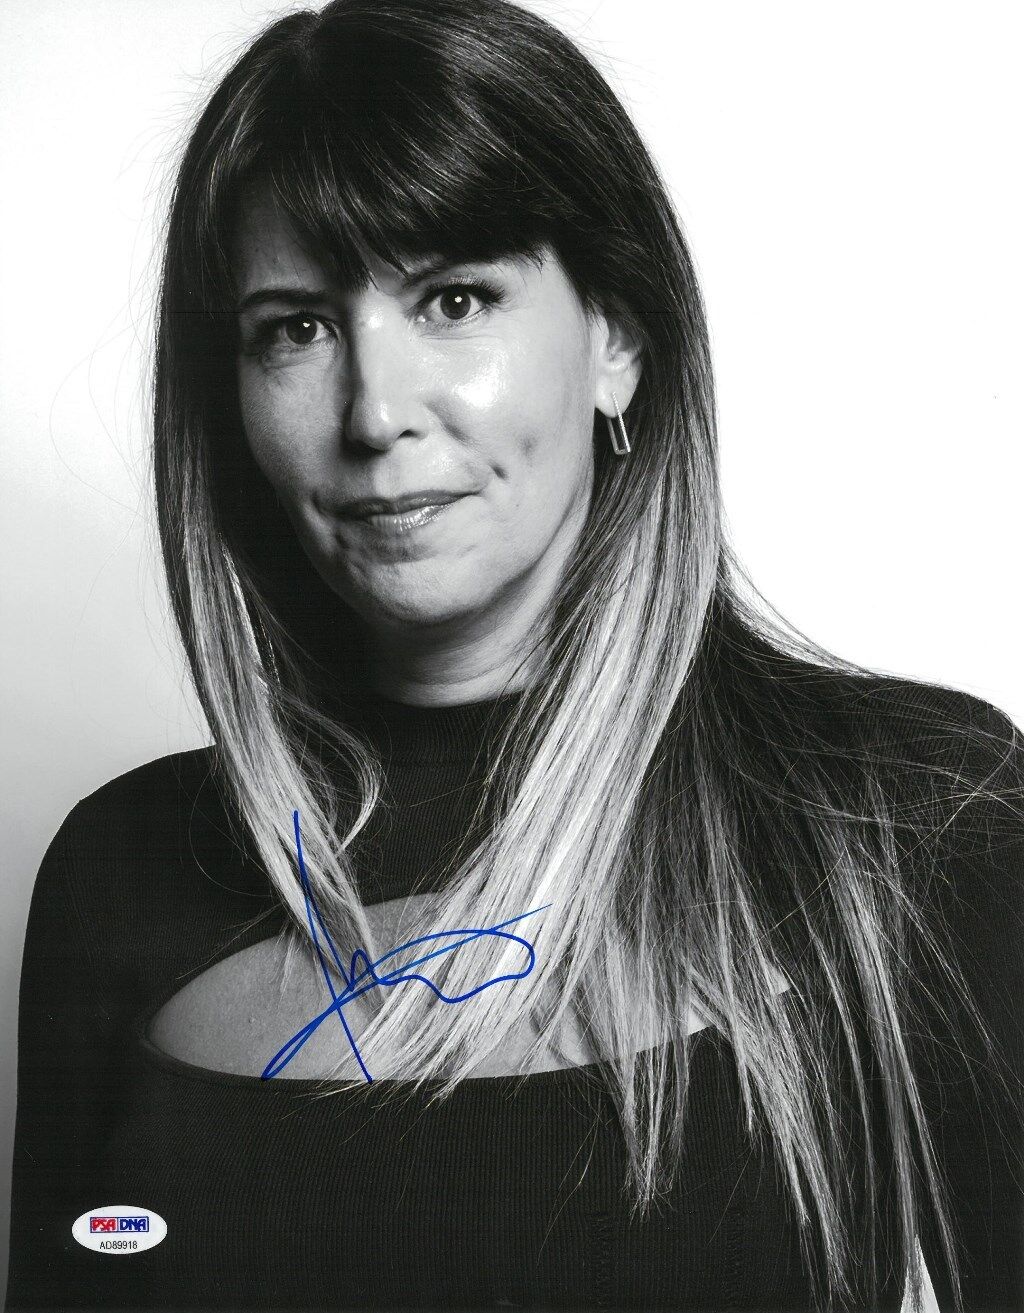 Patty Jenkins Signed Authentic Autographed 11x14 B/W Photo Poster painting PSA/DNA #AD89918